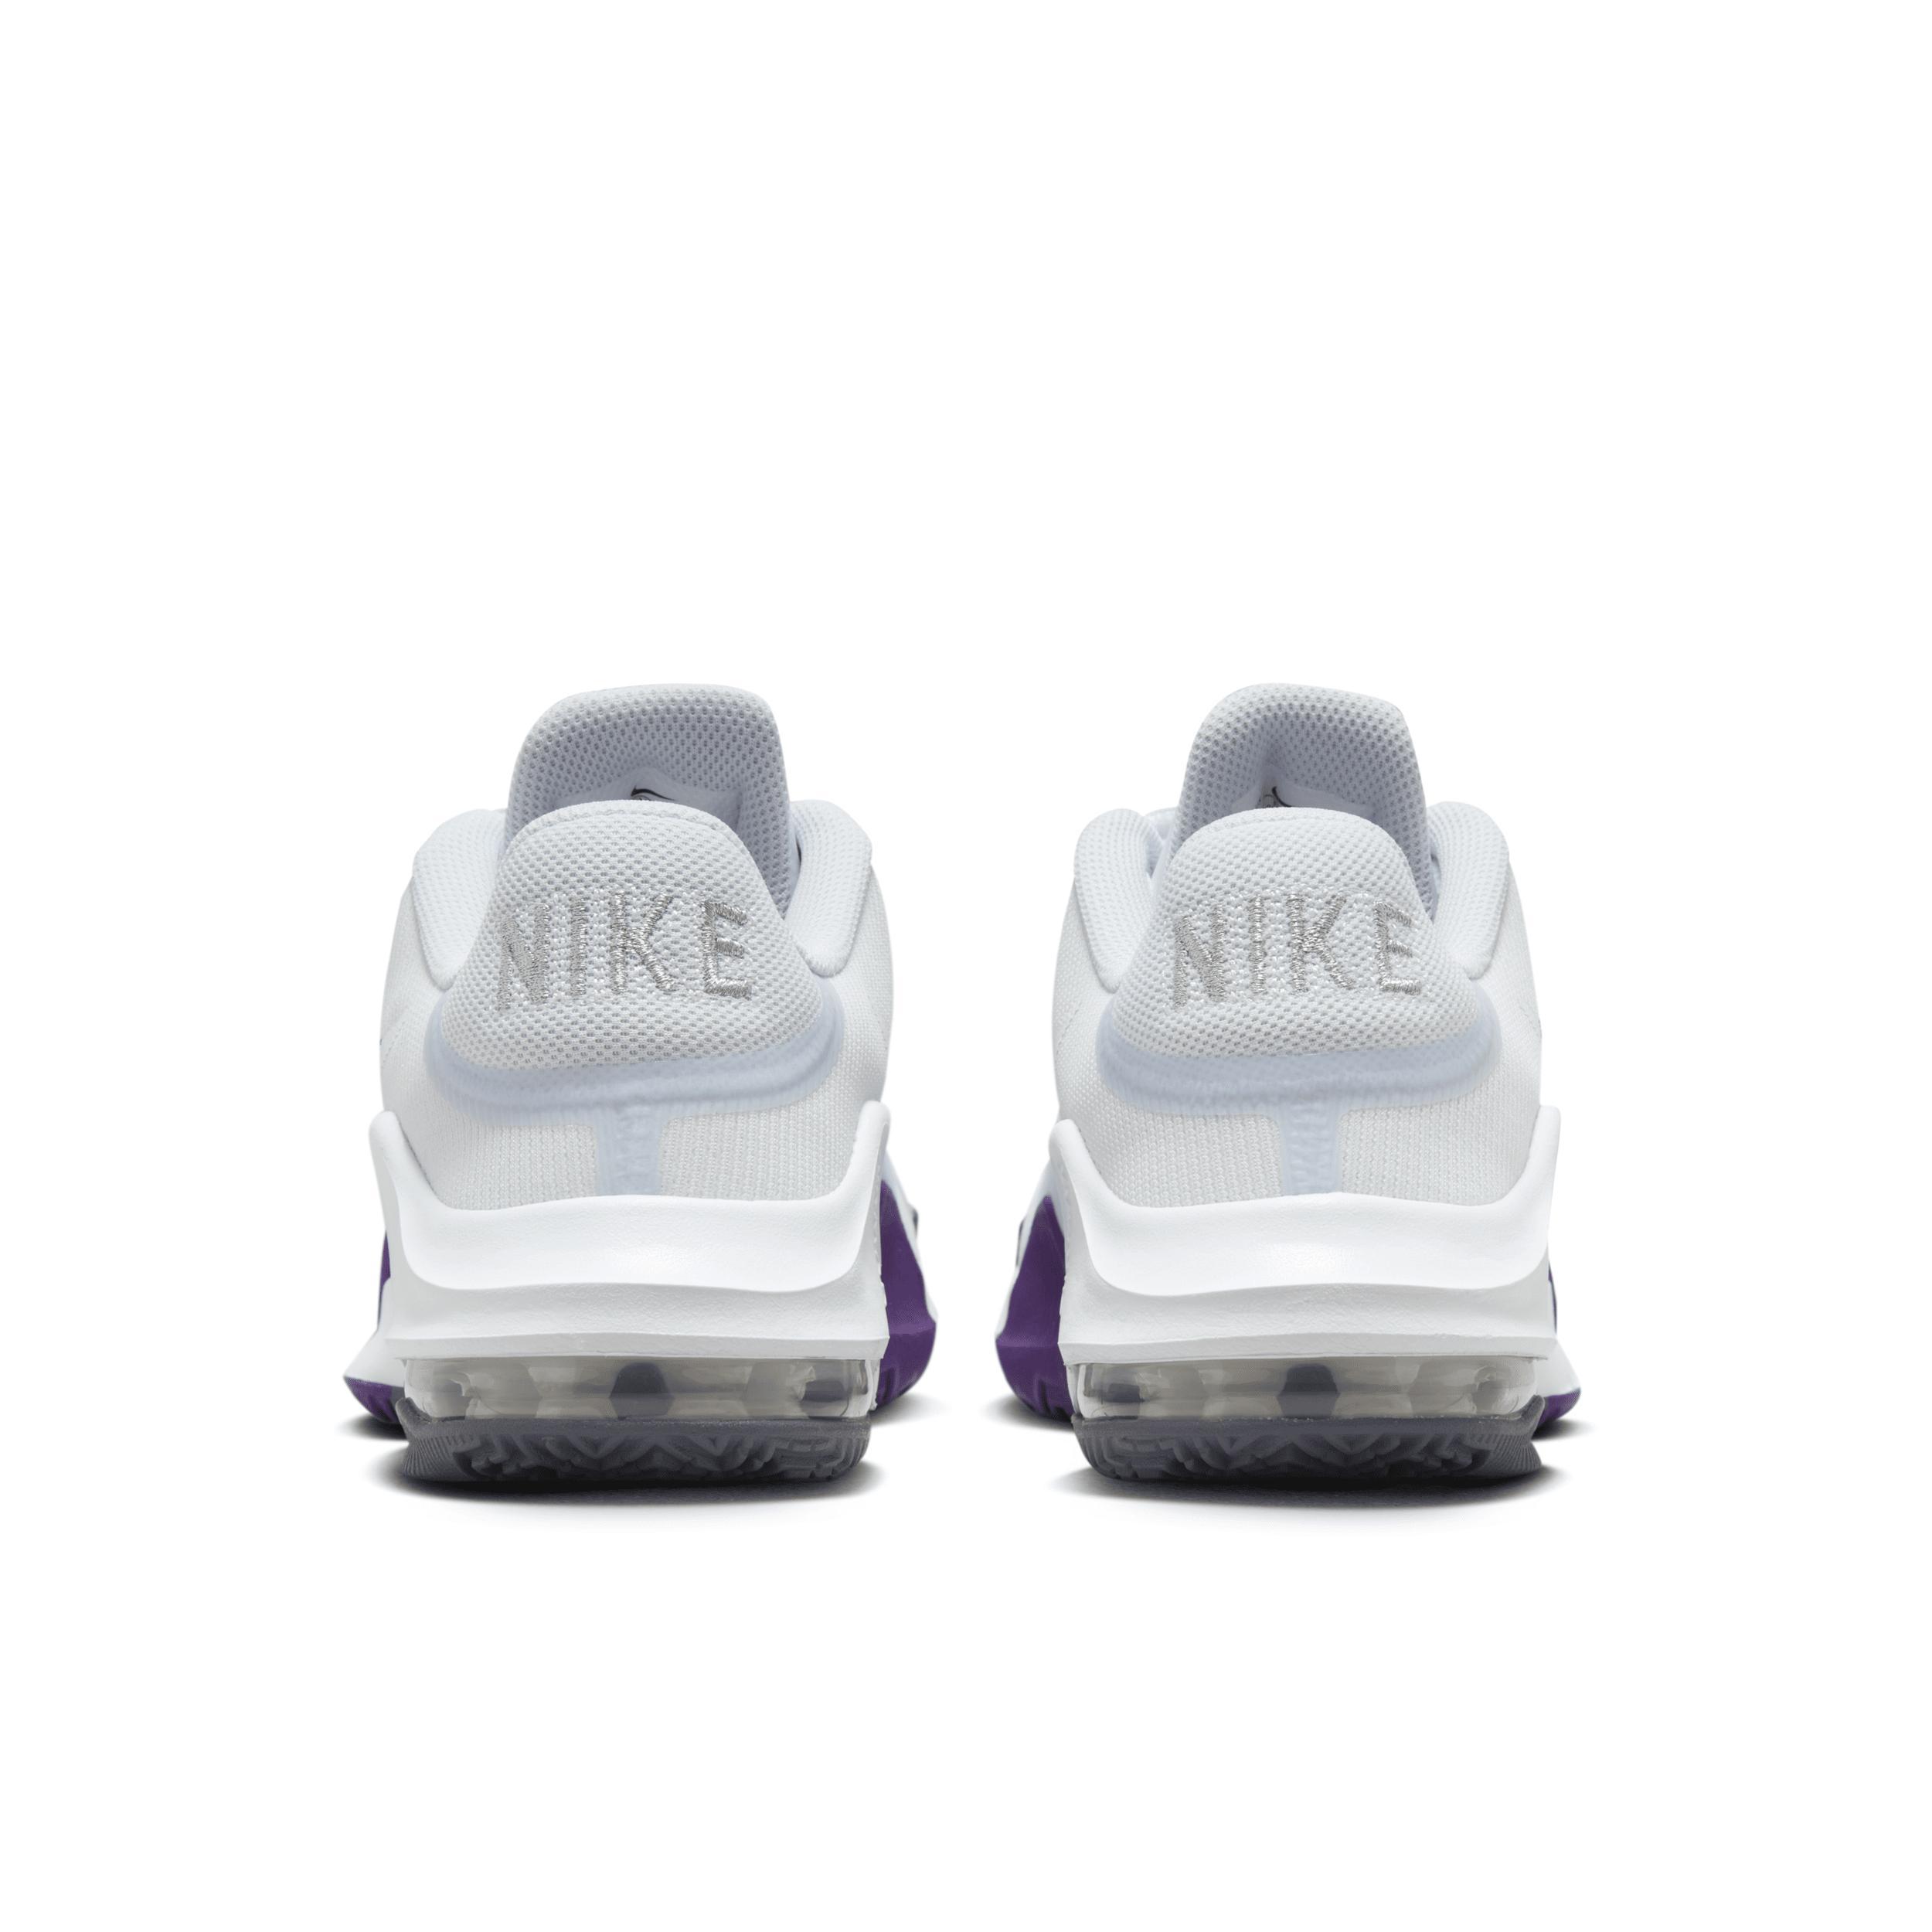 Nike Women's Air Max Impact 4 Basketball Shoes Product Image